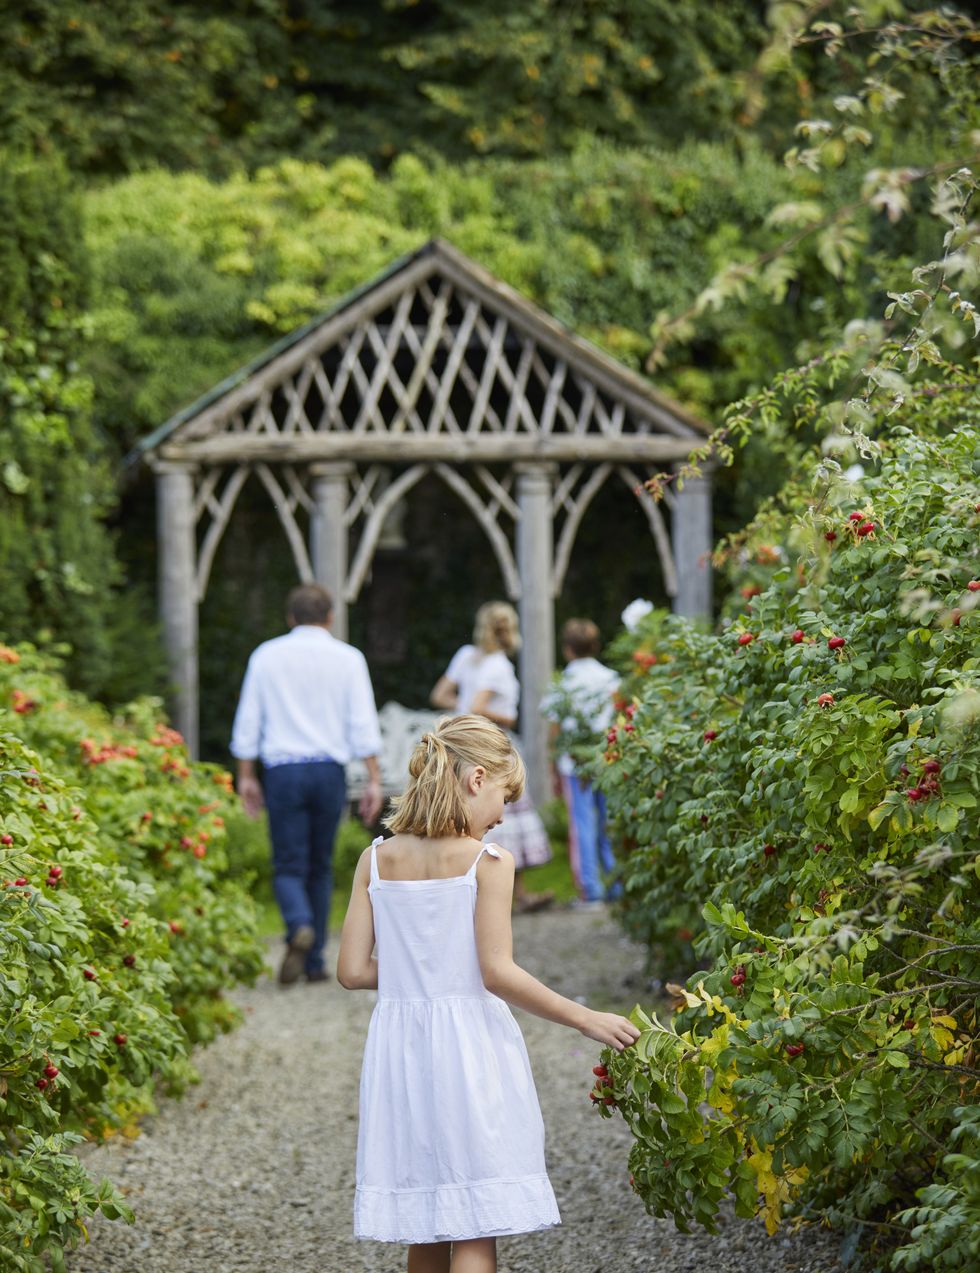 ireland’s glin castle\, owned by landscape designer catherine fitzgerald christabel 10 picks a rugosa rose growing along a path the temple was constructed from pine trees harvested from the estate by tom ward, olda and desmond’s gardener